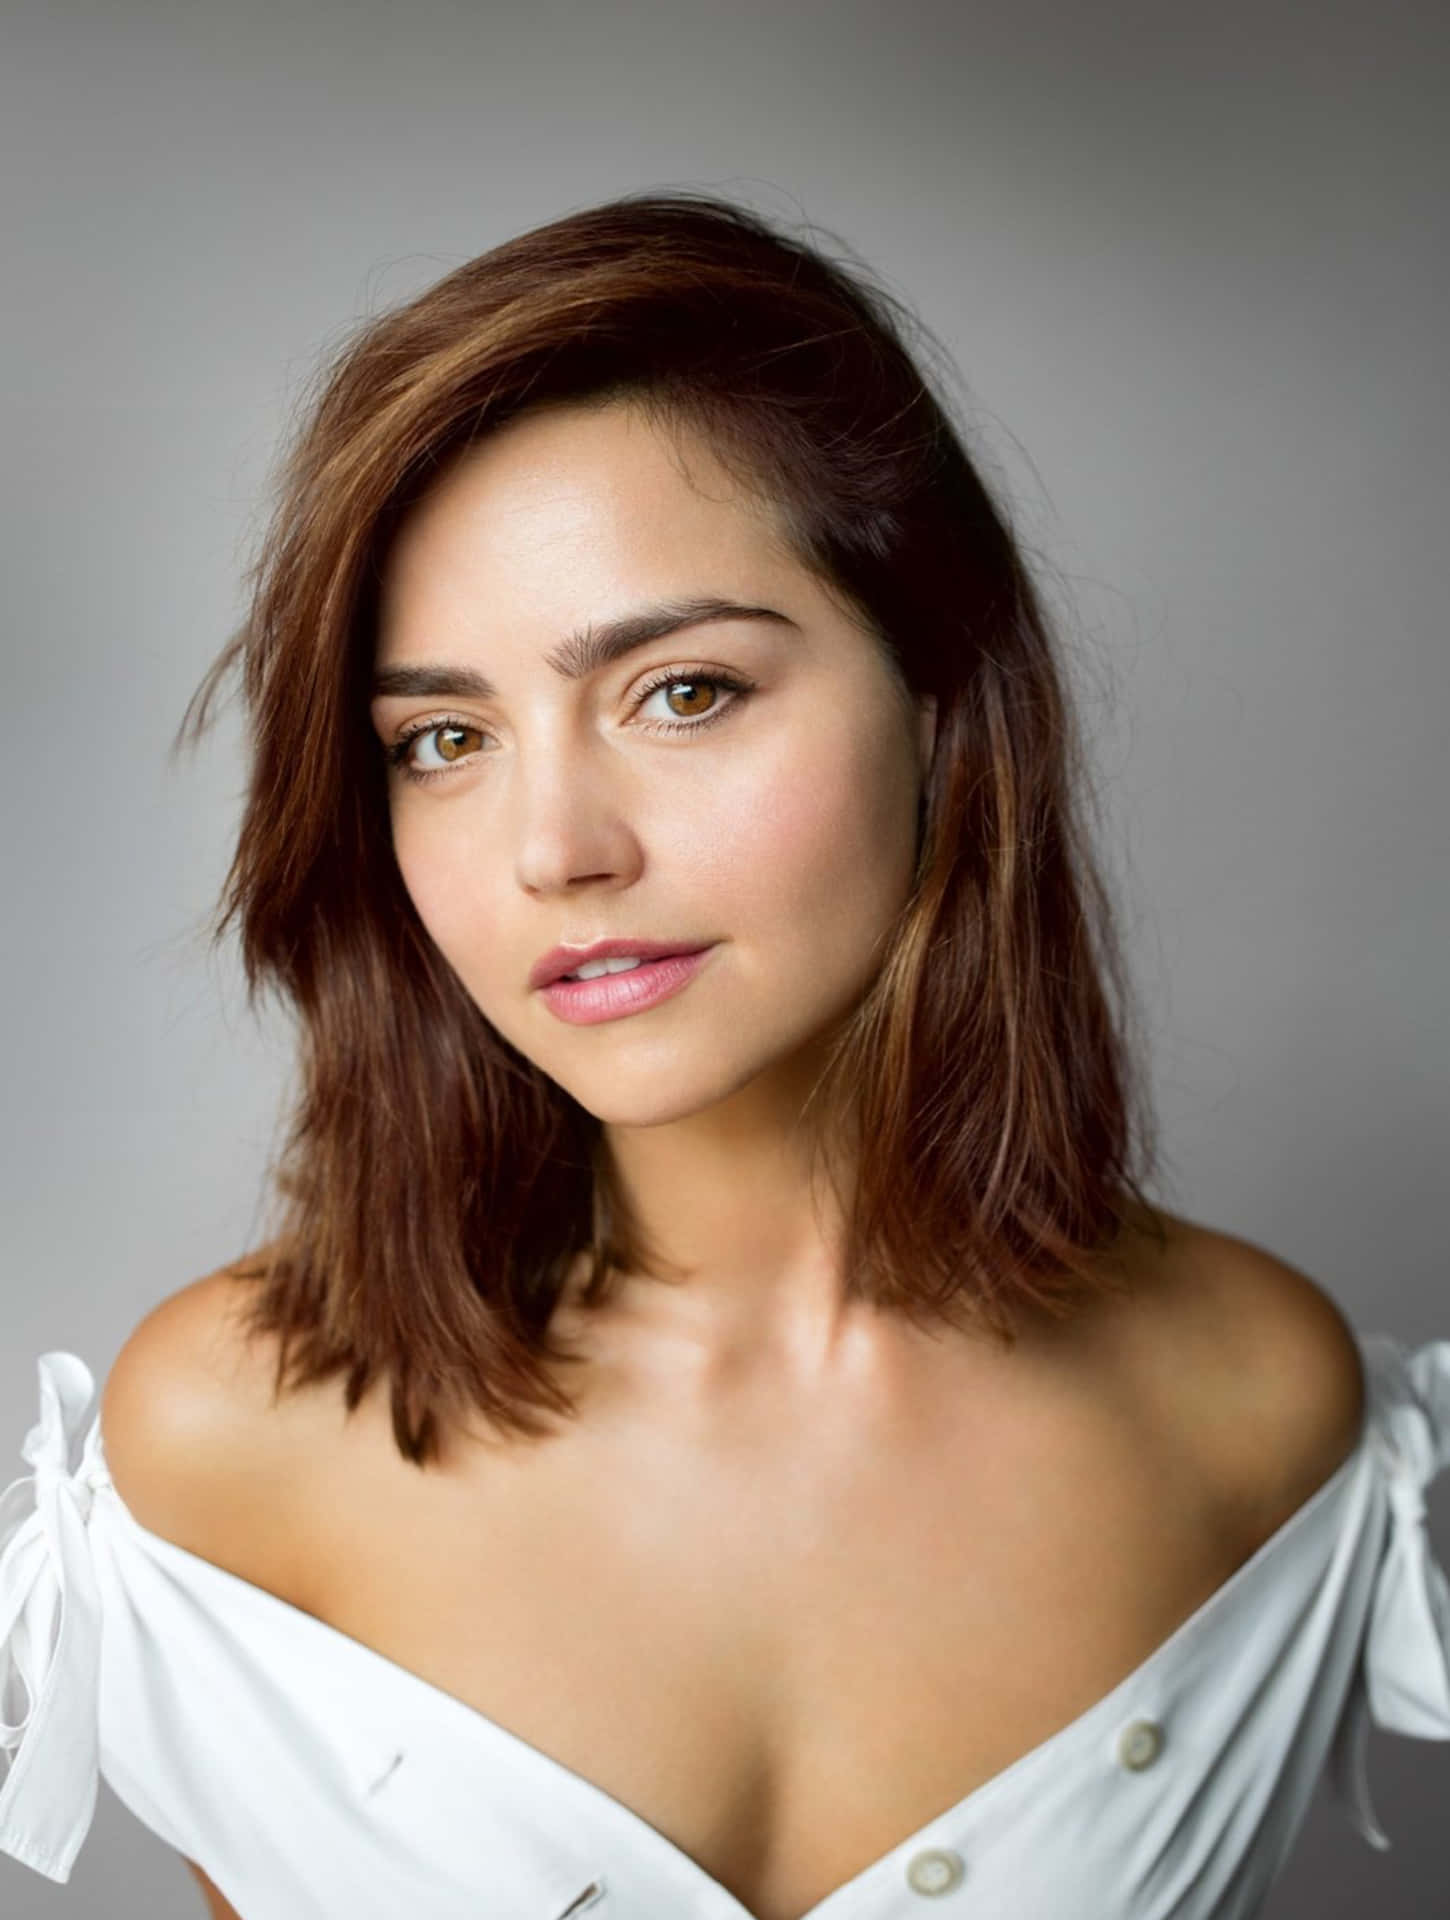 Jenna Coleman Poses Elegantly Against A Simple Backdrop